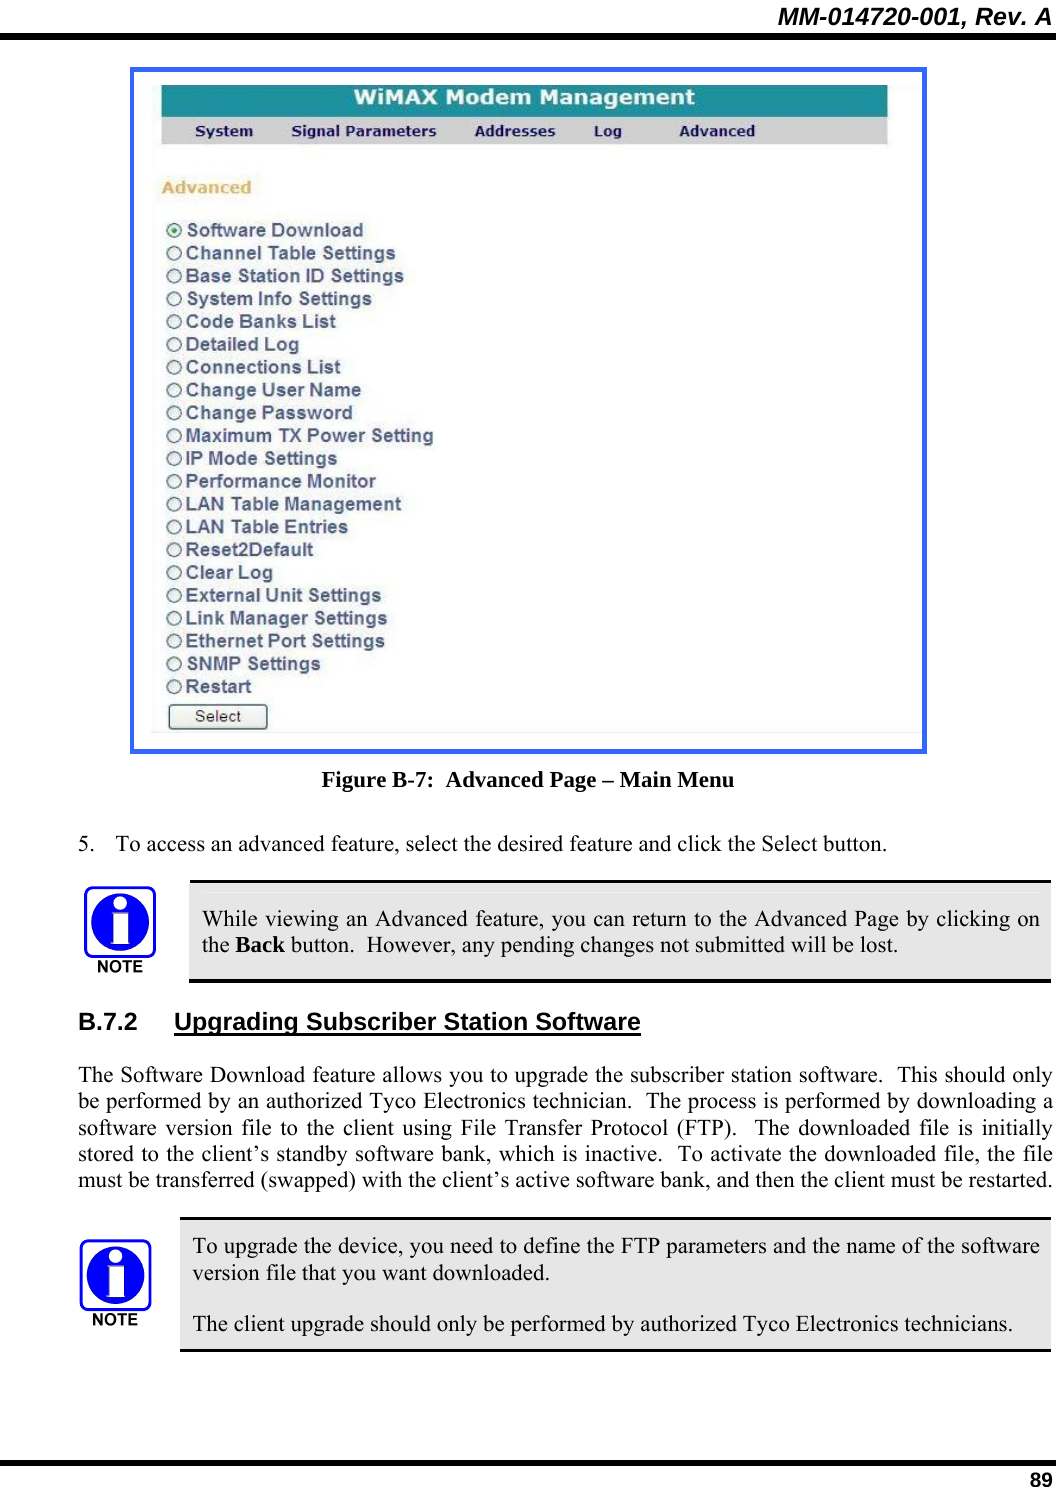 MM-014720-001, Rev. A  89  Figure B-7:  Advanced Page – Main Menu 5. To access an advanced feature, select the desired feature and click the Select button.   While viewing an Advanced feature, you can return to the Advanced Page by clicking on the Back button.  However, any pending changes not submitted will be lost. B.7.2  Upgrading Subscriber Station Software The Software Download feature allows you to upgrade the subscriber station software.  This should only be performed by an authorized Tyco Electronics technician.  The process is performed by downloading a software version file to the client using File Transfer Protocol (FTP).  The downloaded file is initially stored to the client’s standby software bank, which is inactive.  To activate the downloaded file, the file must be transferred (swapped) with the client’s active software bank, and then the client must be restarted.   To upgrade the device, you need to define the FTP parameters and the name of the software version file that you want downloaded. The client upgrade should only be performed by authorized Tyco Electronics technicians. 